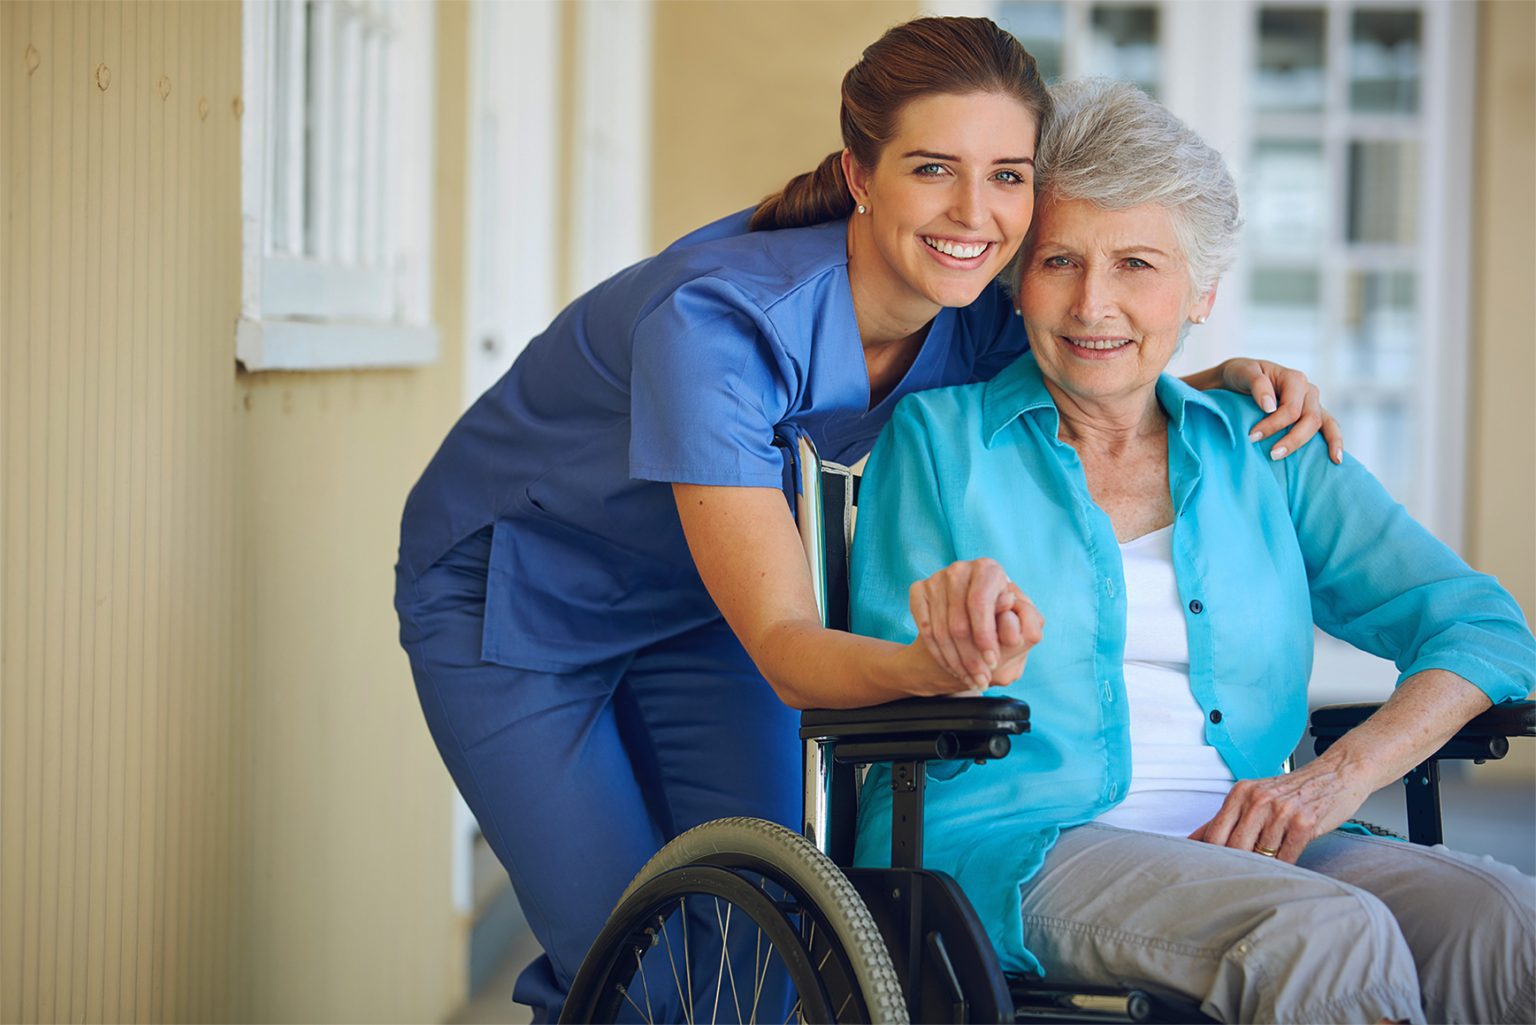 nursing-home-happy-elderly-male-patient-with-woman-caregiver-person-with-disability-retirement